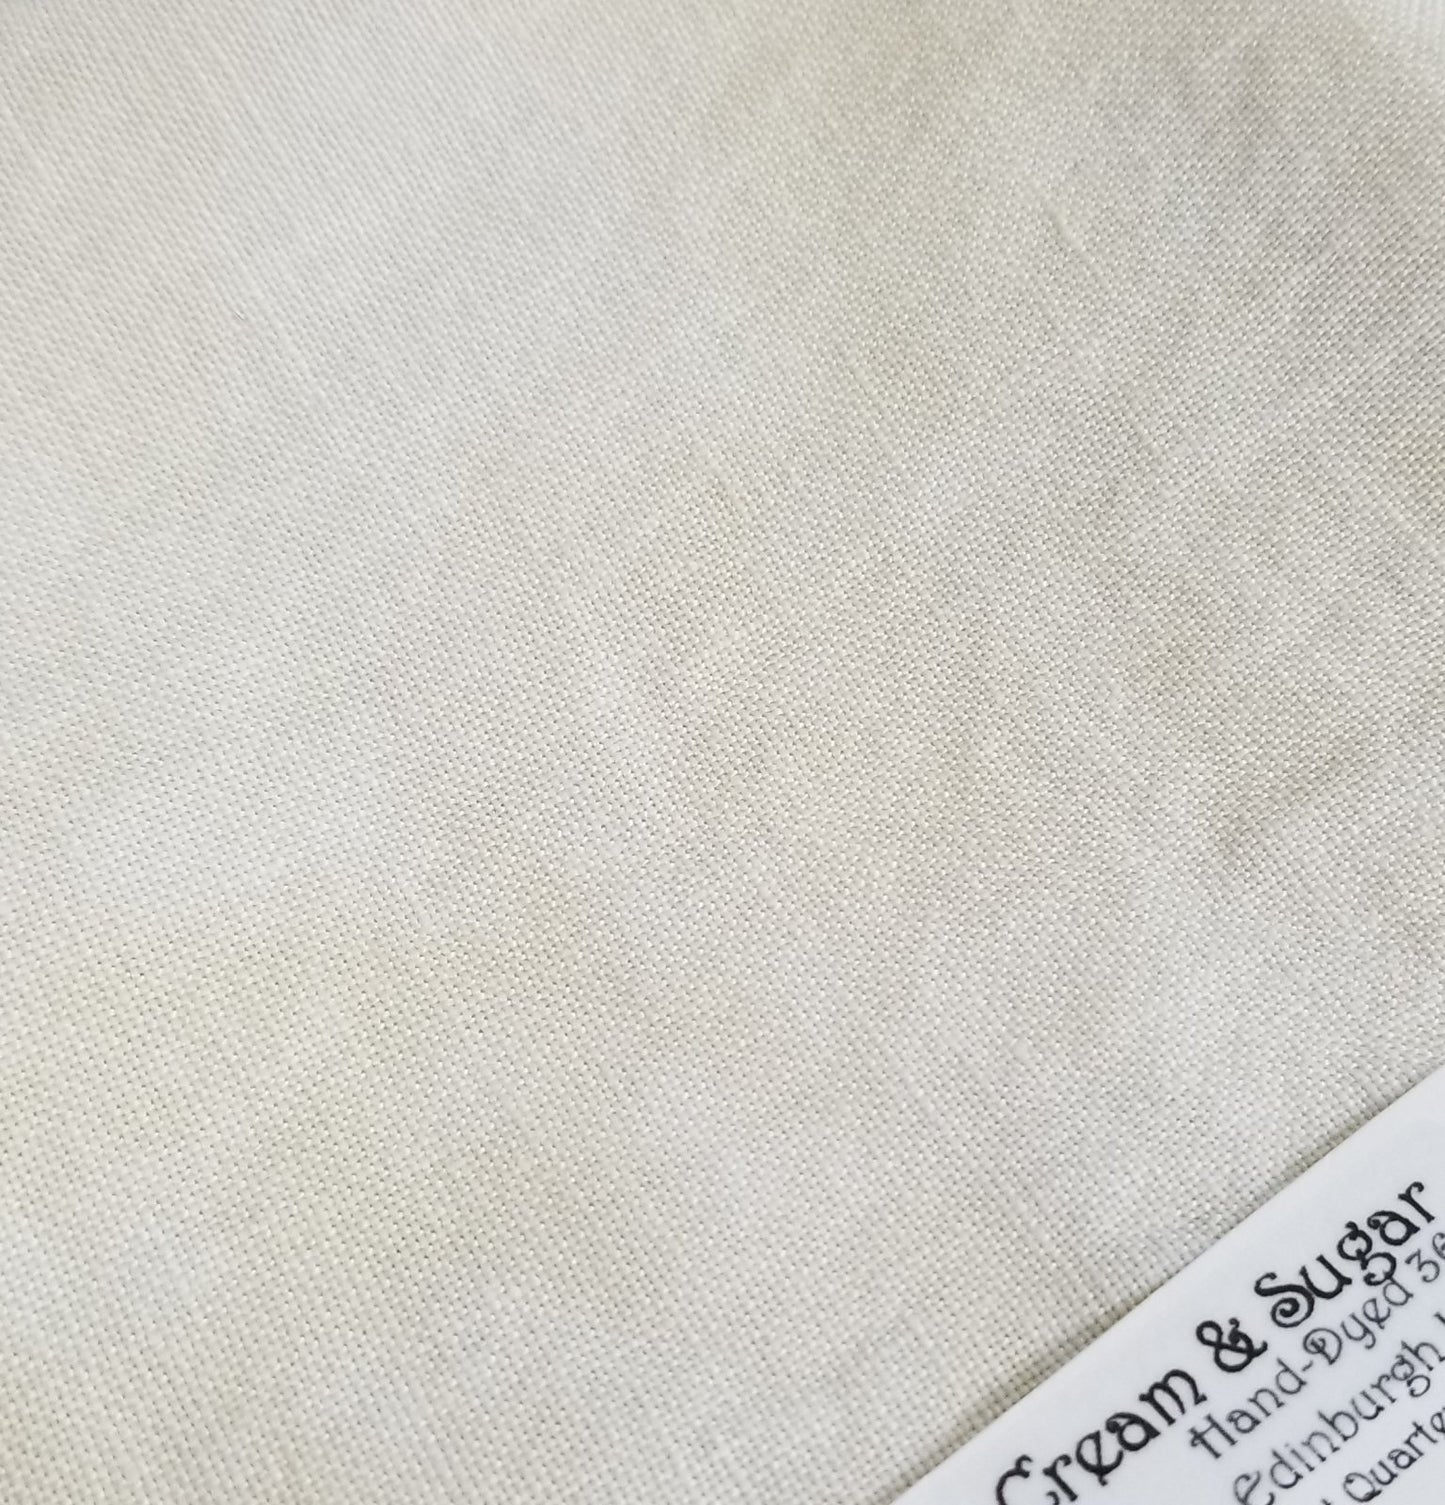 40 Count Linen - Cream and Sugar - Fiber on a Whim, Fabric, The Crafty Grimalkin - A Cross Stitch Store